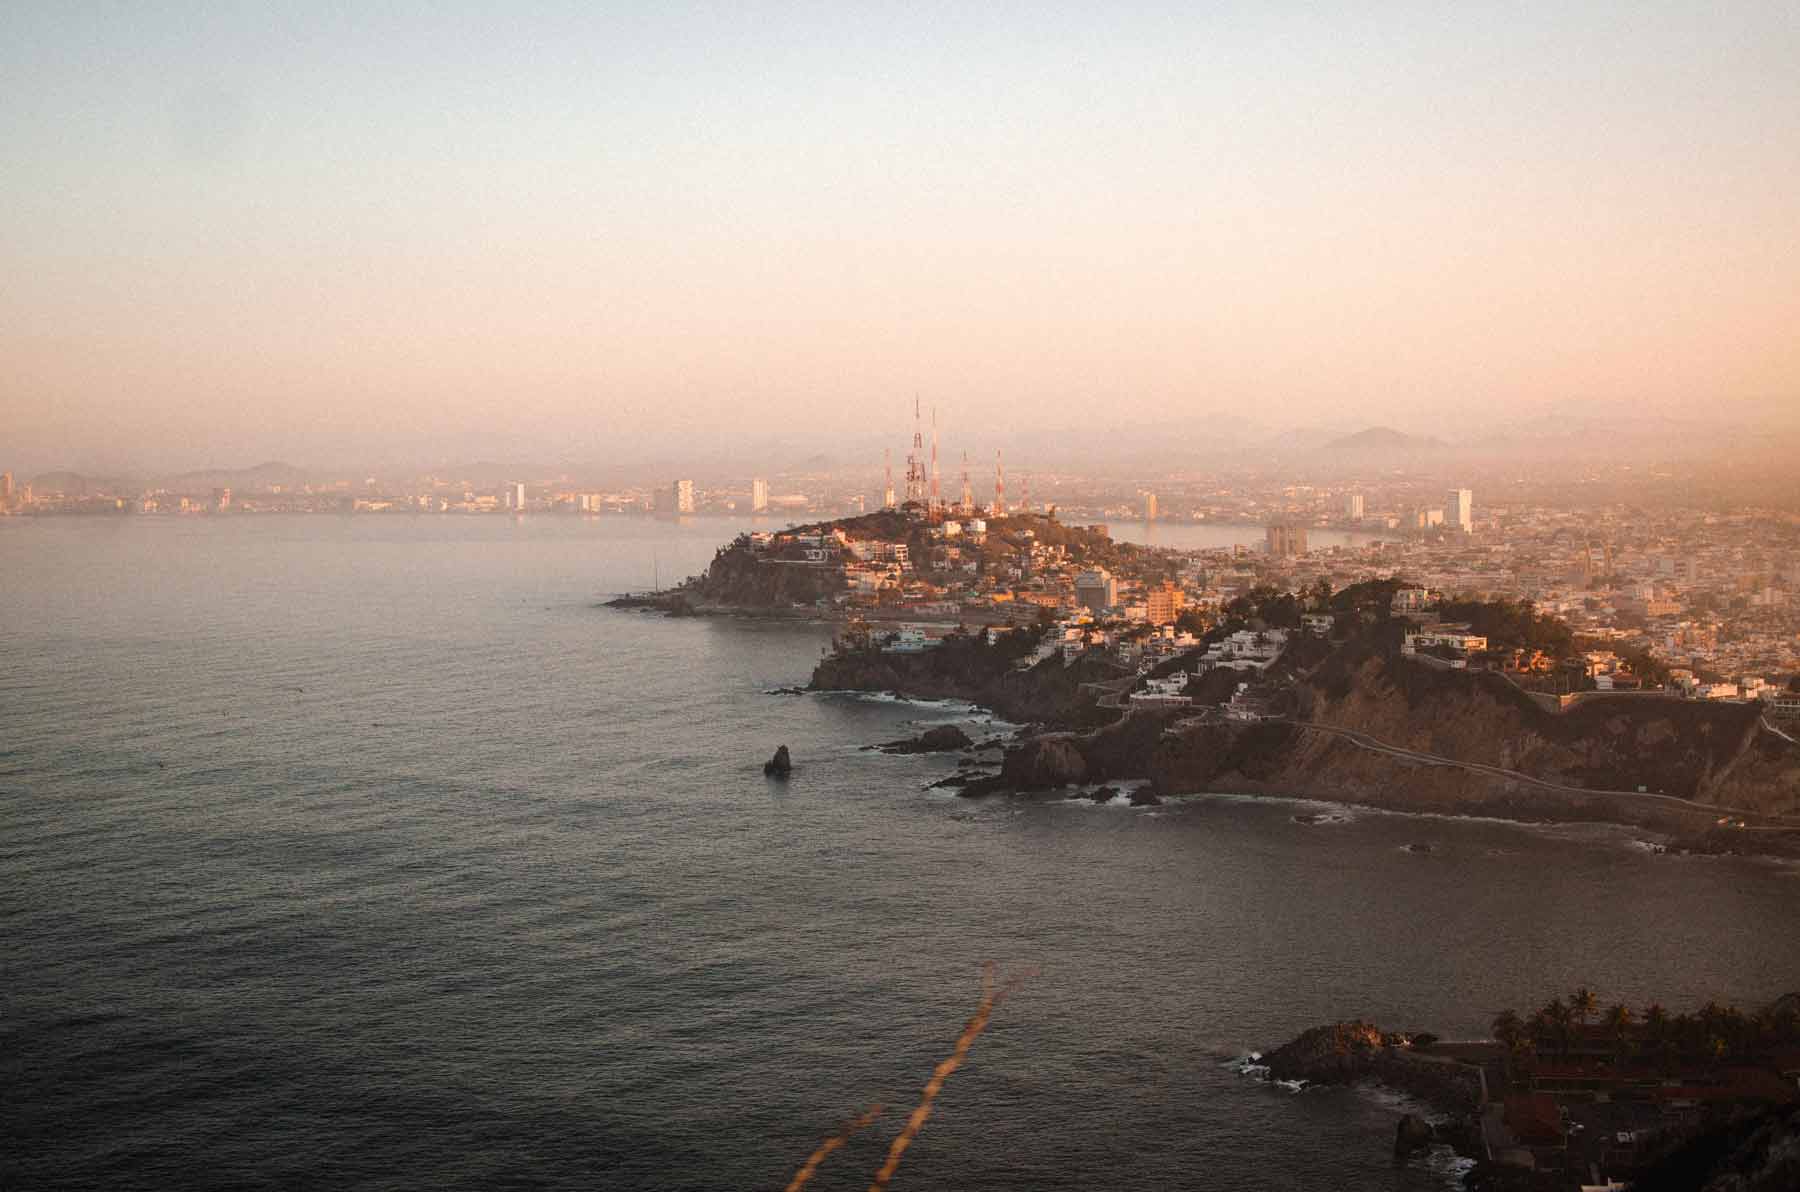 View of Mazatlan from the lighthouse at sunrise